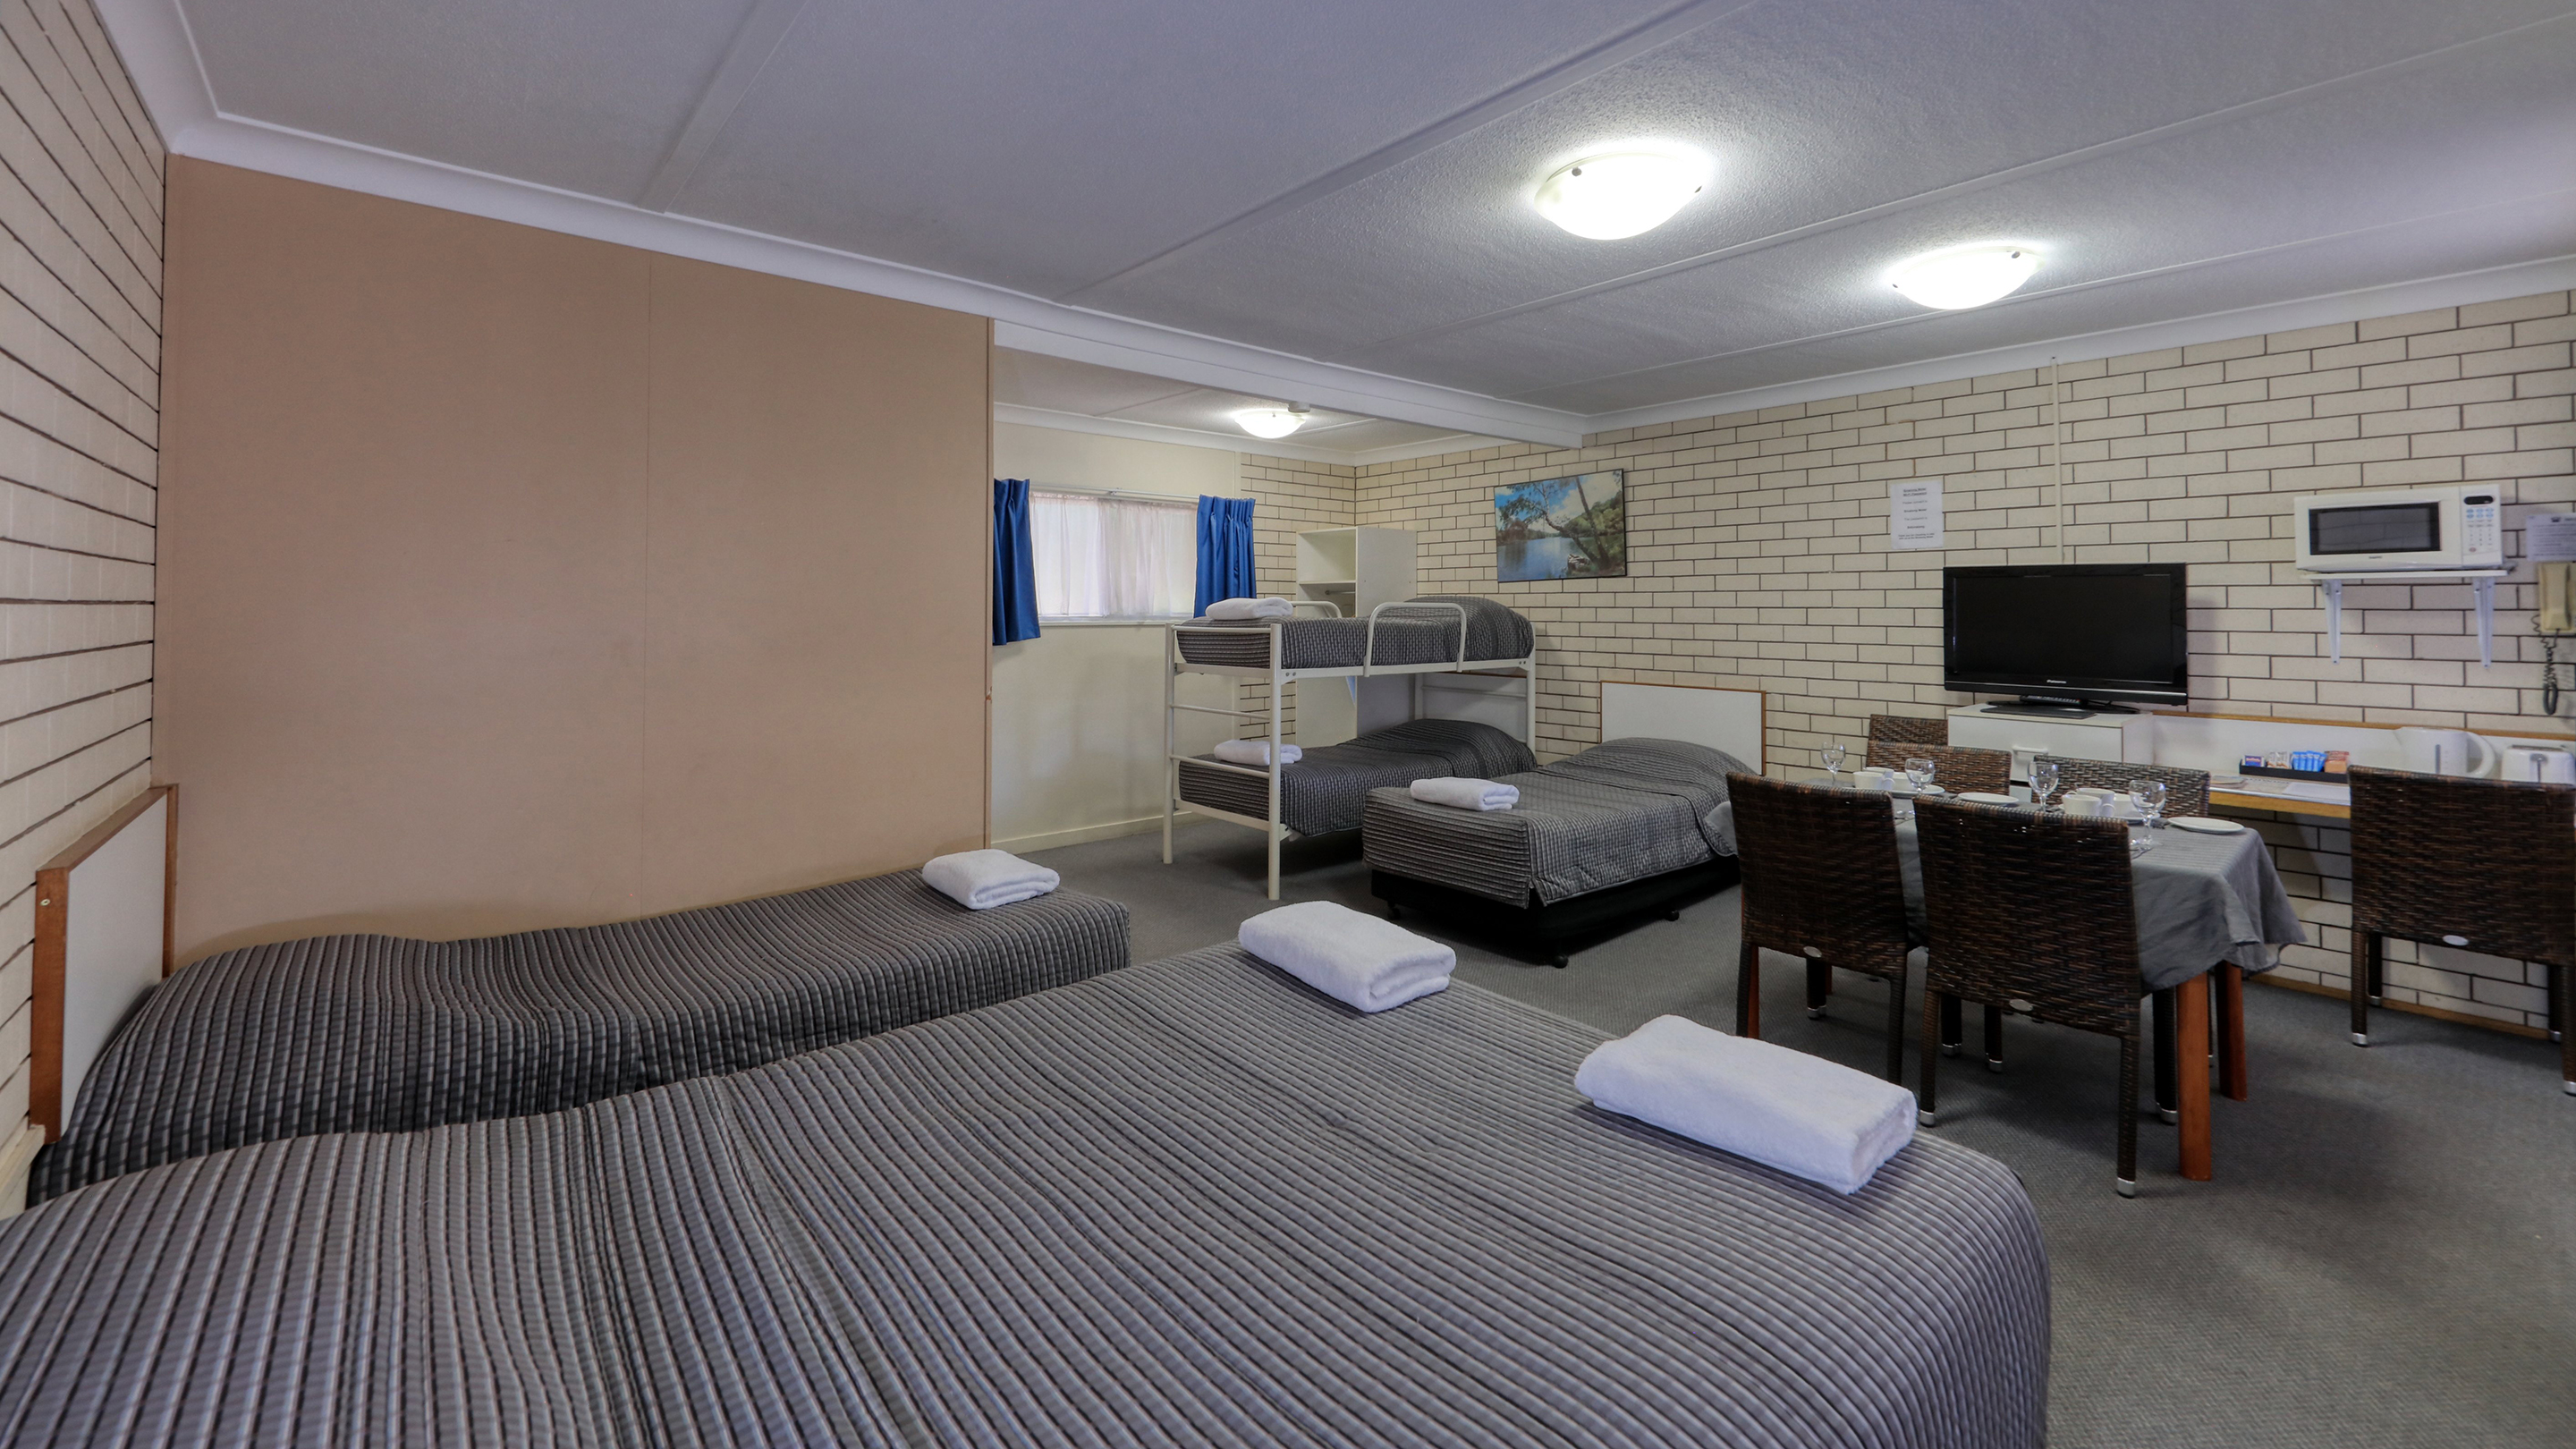 Binalong Motel offers five room types to choose from which include Large Family Room, Family Room, Queen Room, Twin Room, and Single Room. - Goondiwindi - QLD